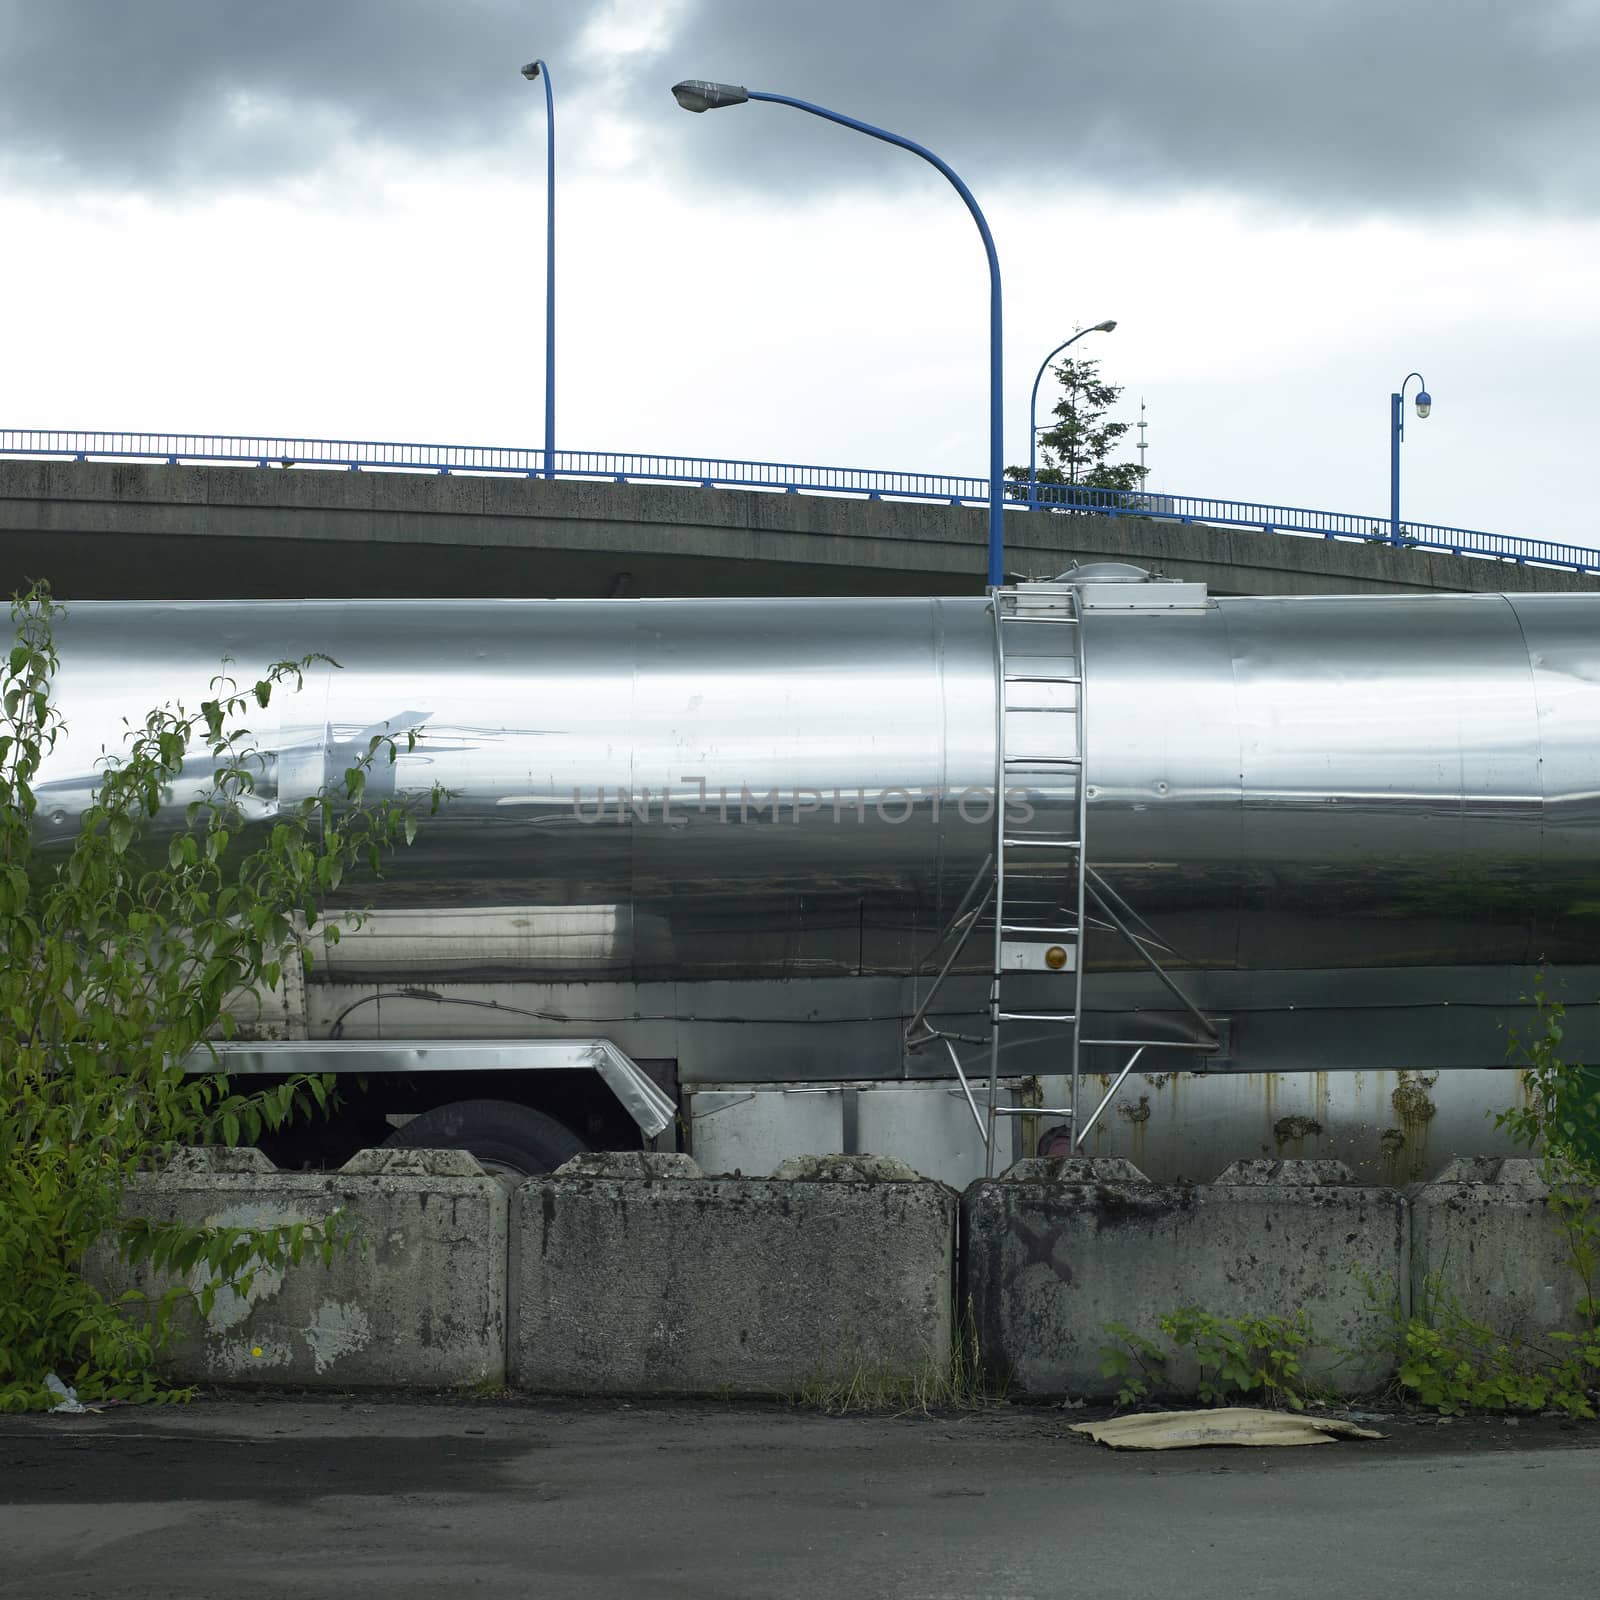 Shiny chrome tanker trailer with side ladder parked near a bridge